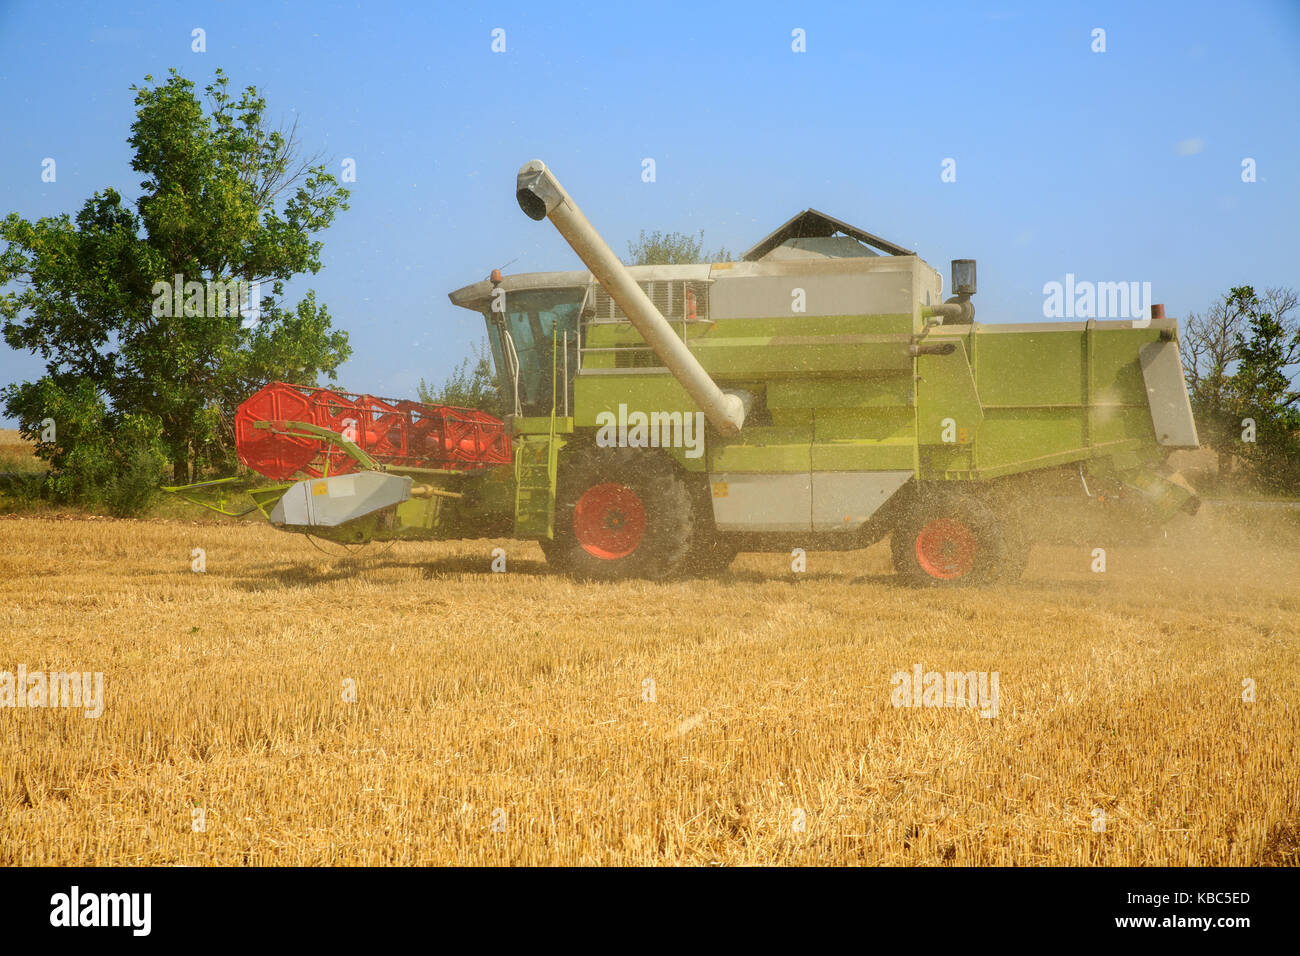 Combine harvester working on a golden wheat field behind a cloud of grain dust in the air. Bright summer day with blue sky Stock Photo